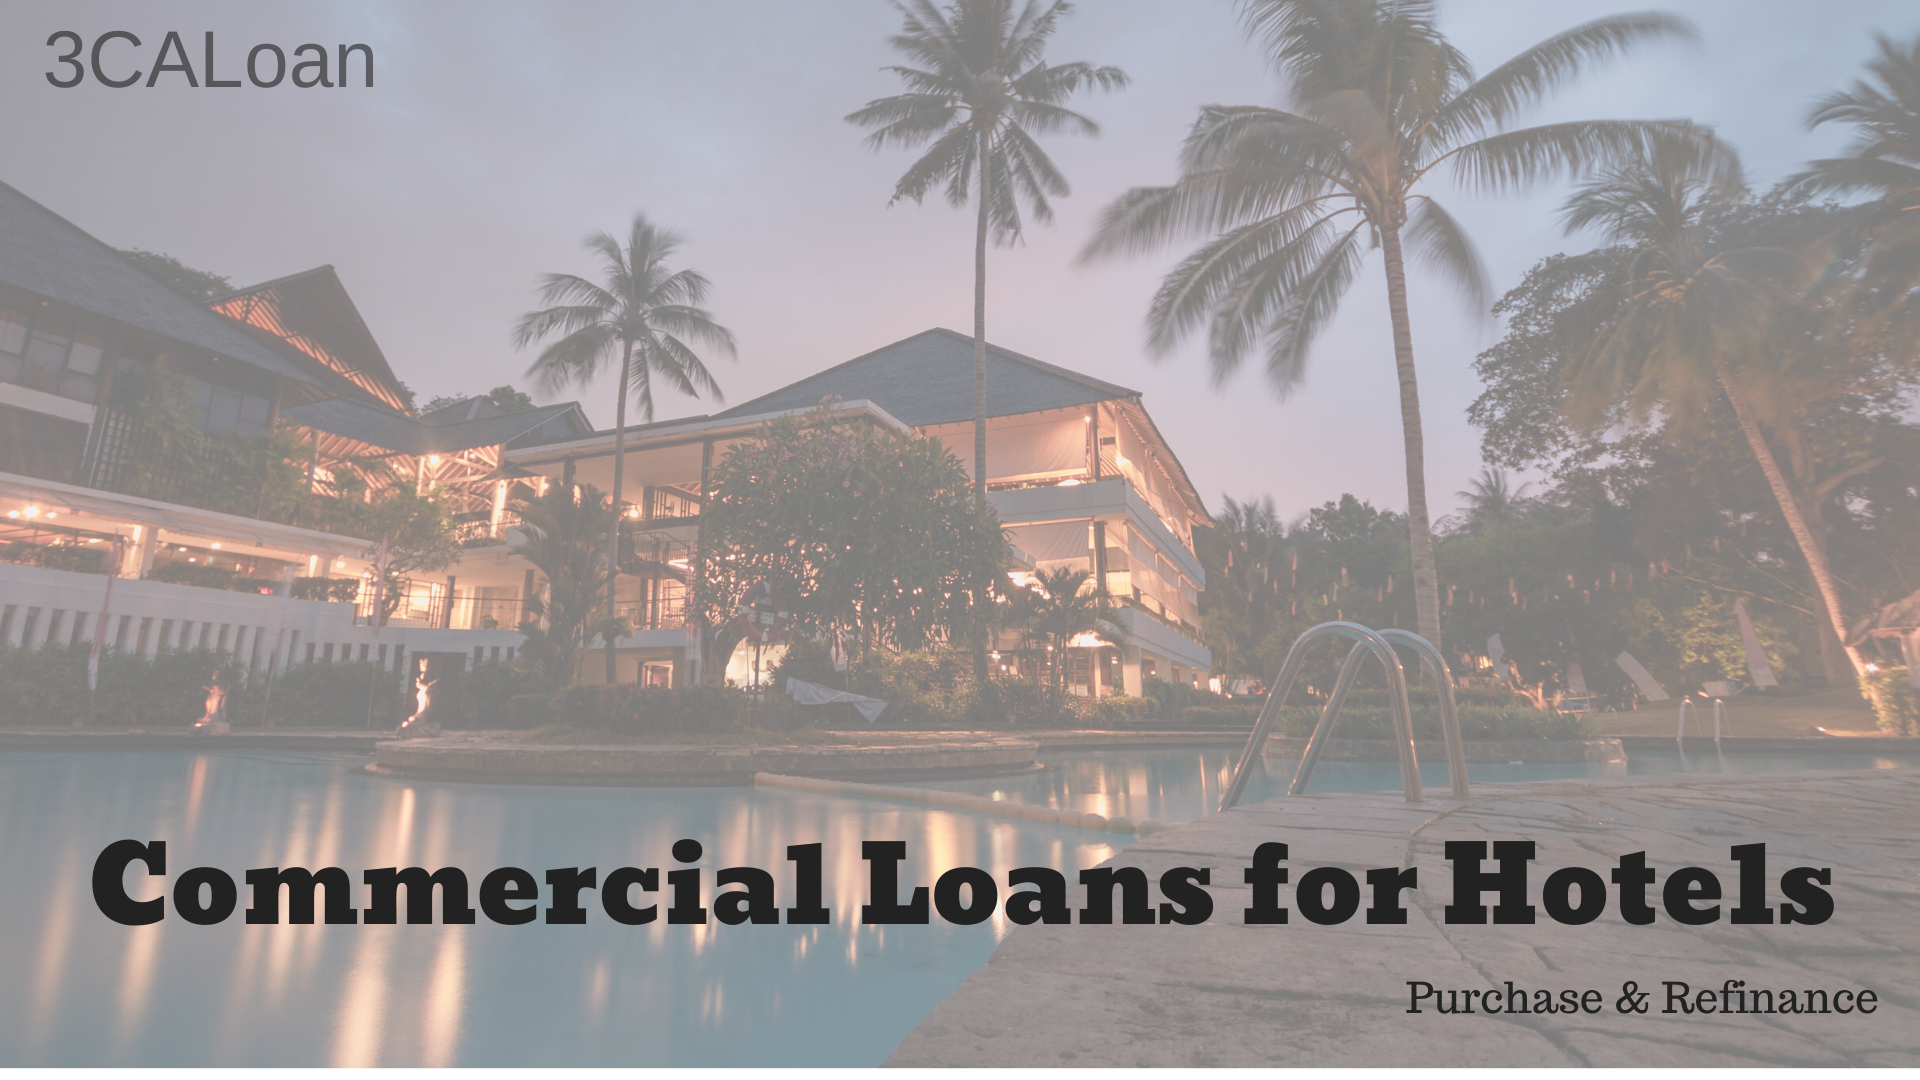 Commercial Hotel loans for Purchase & Refinance